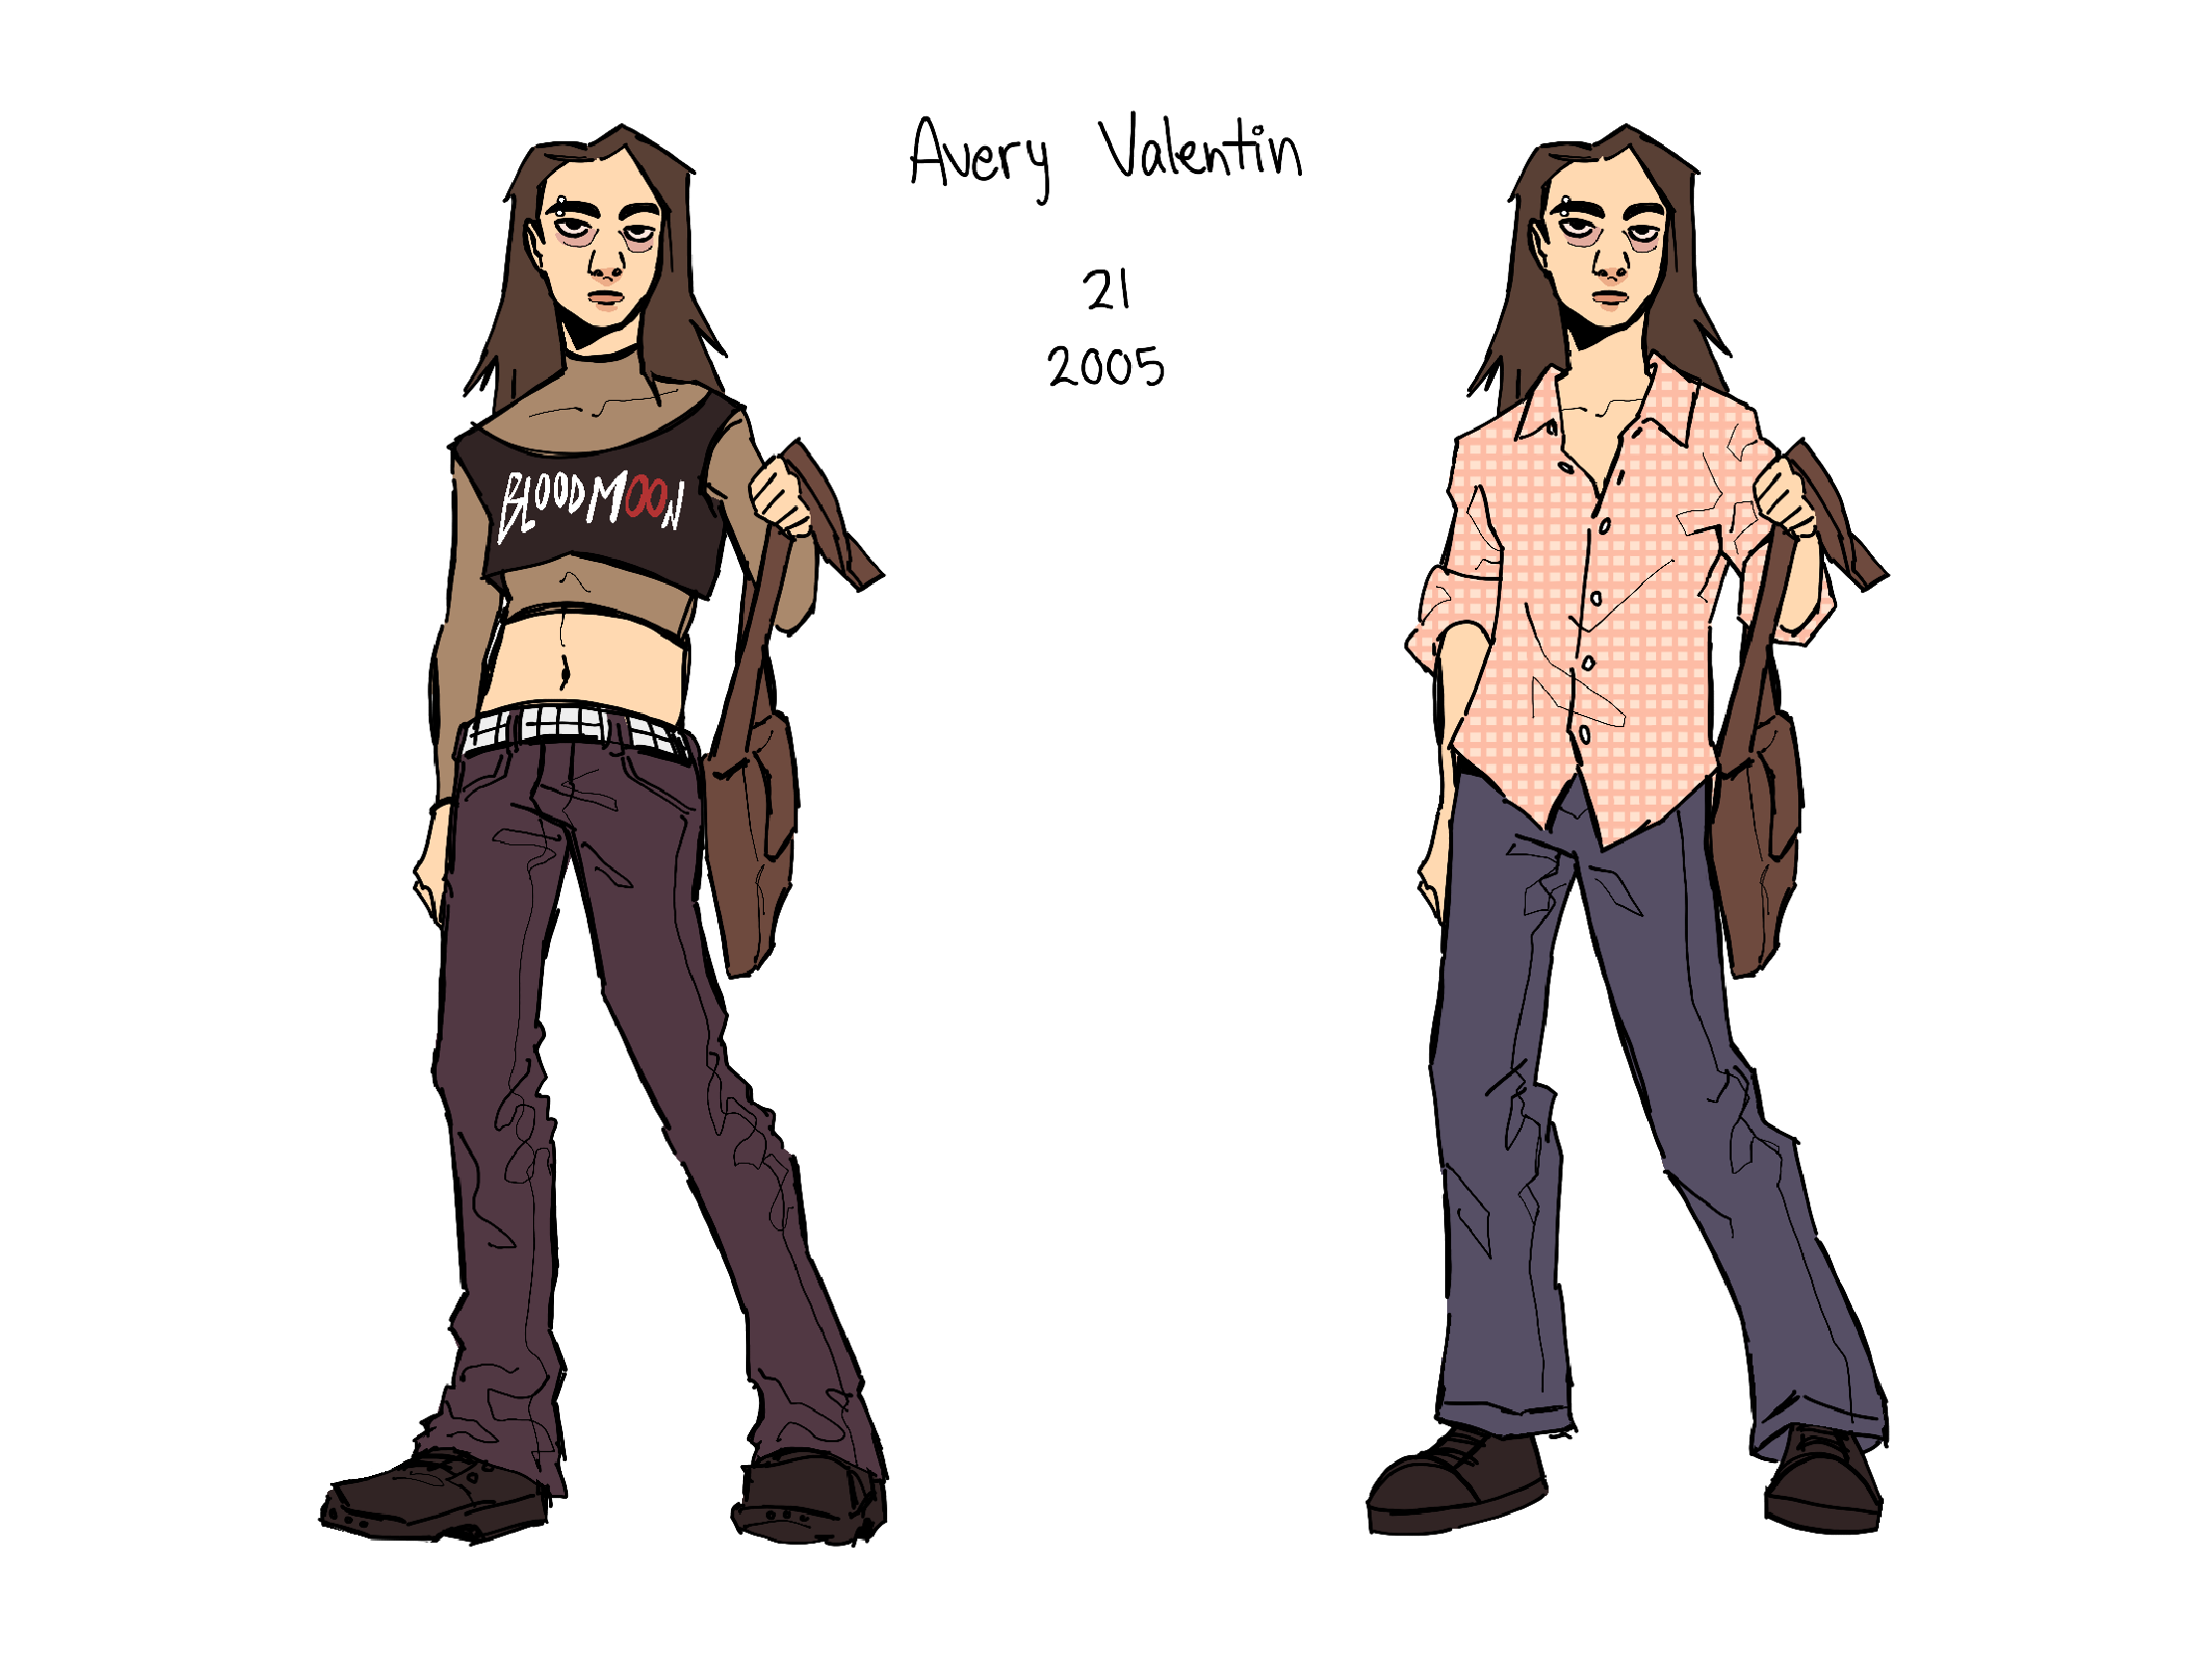 character sheet of avery